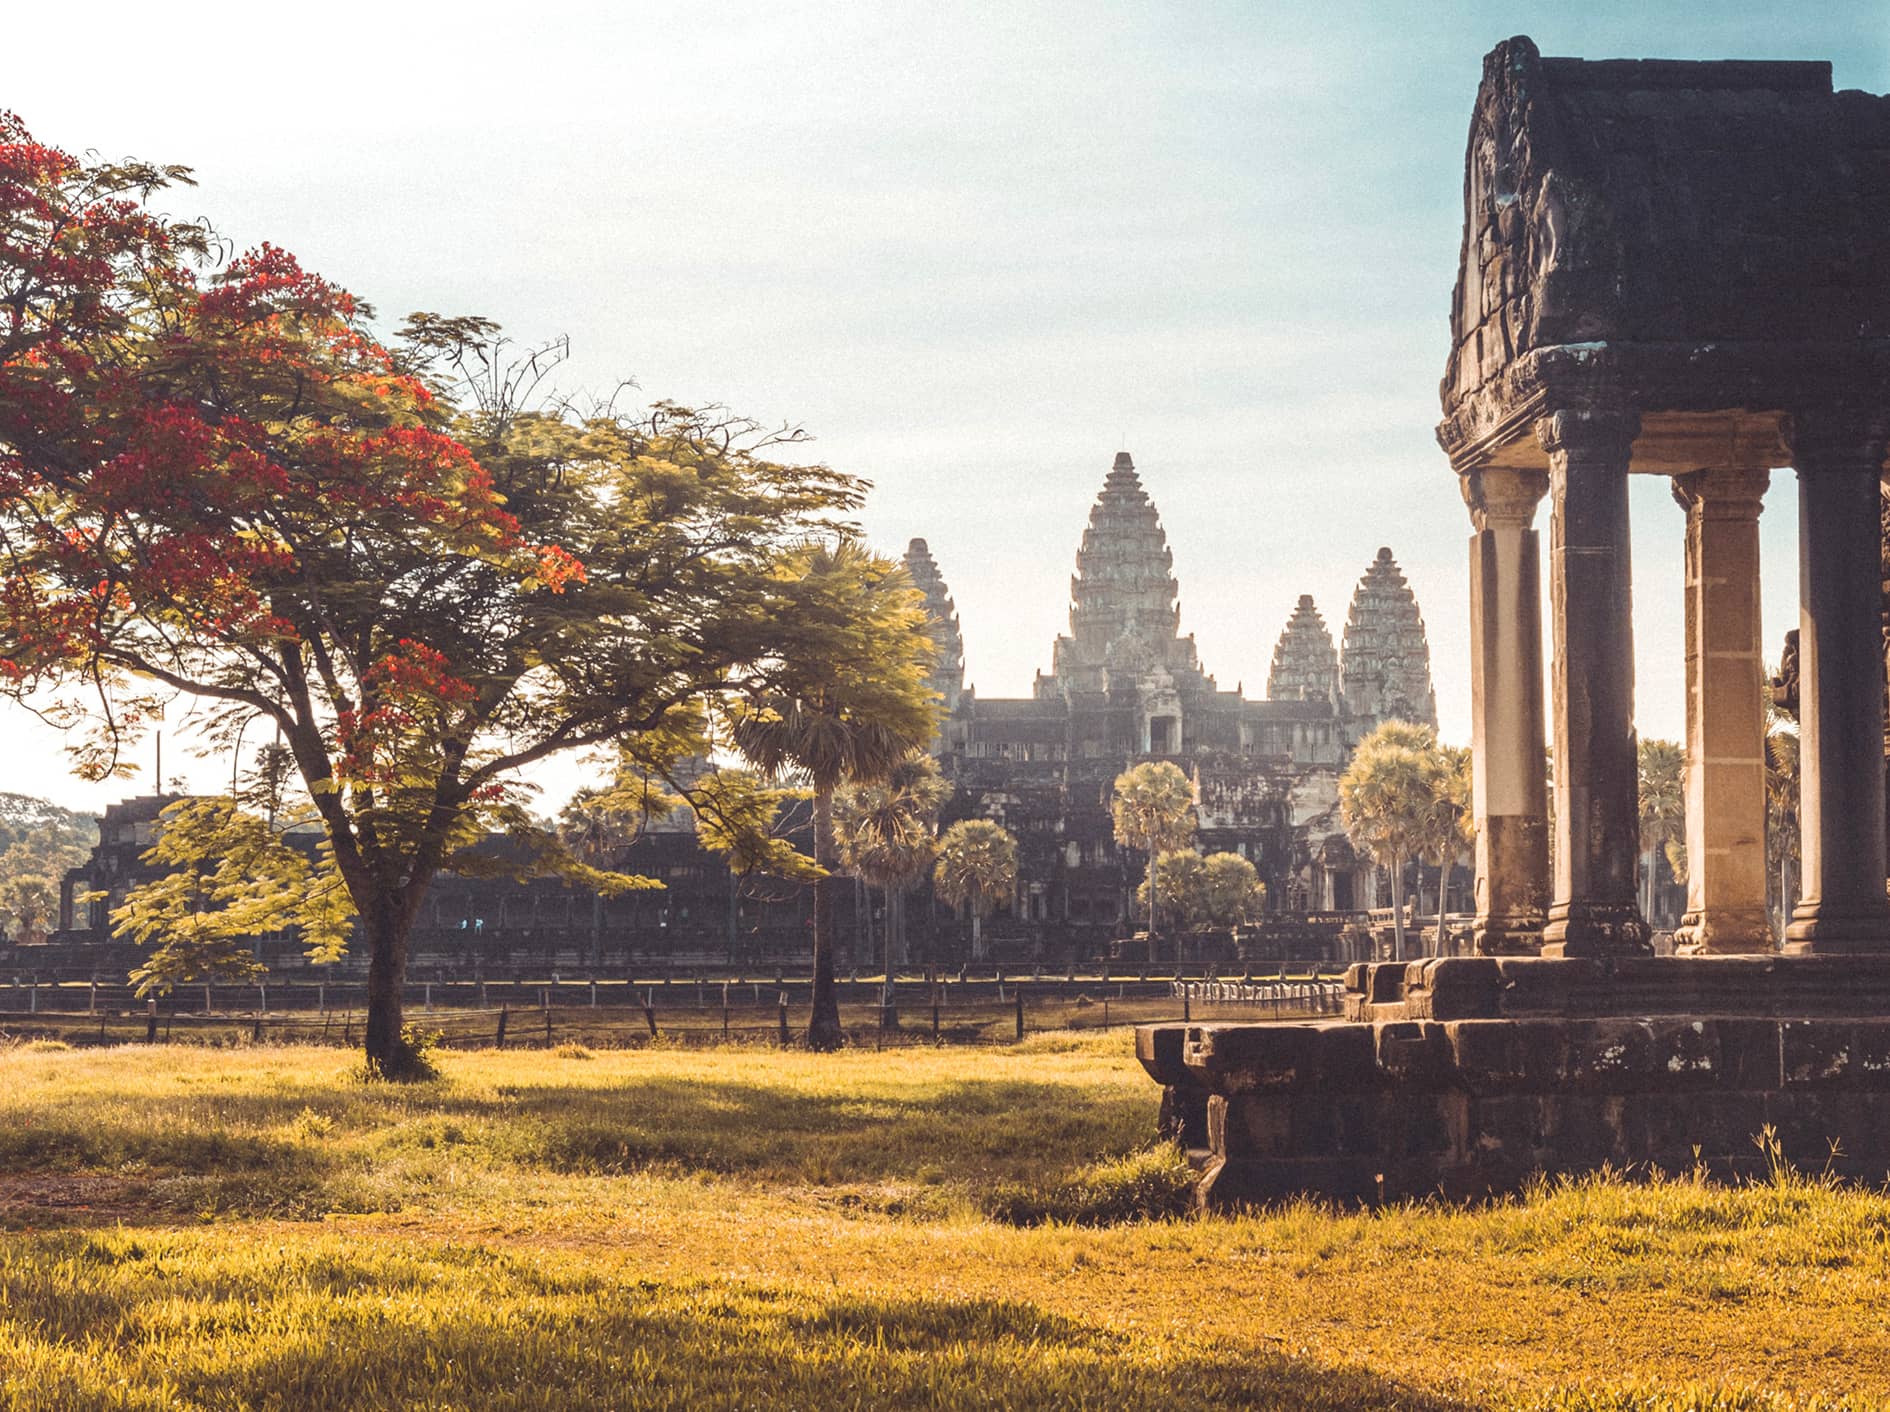  Encounter the temples of Angkor on a day trip.  